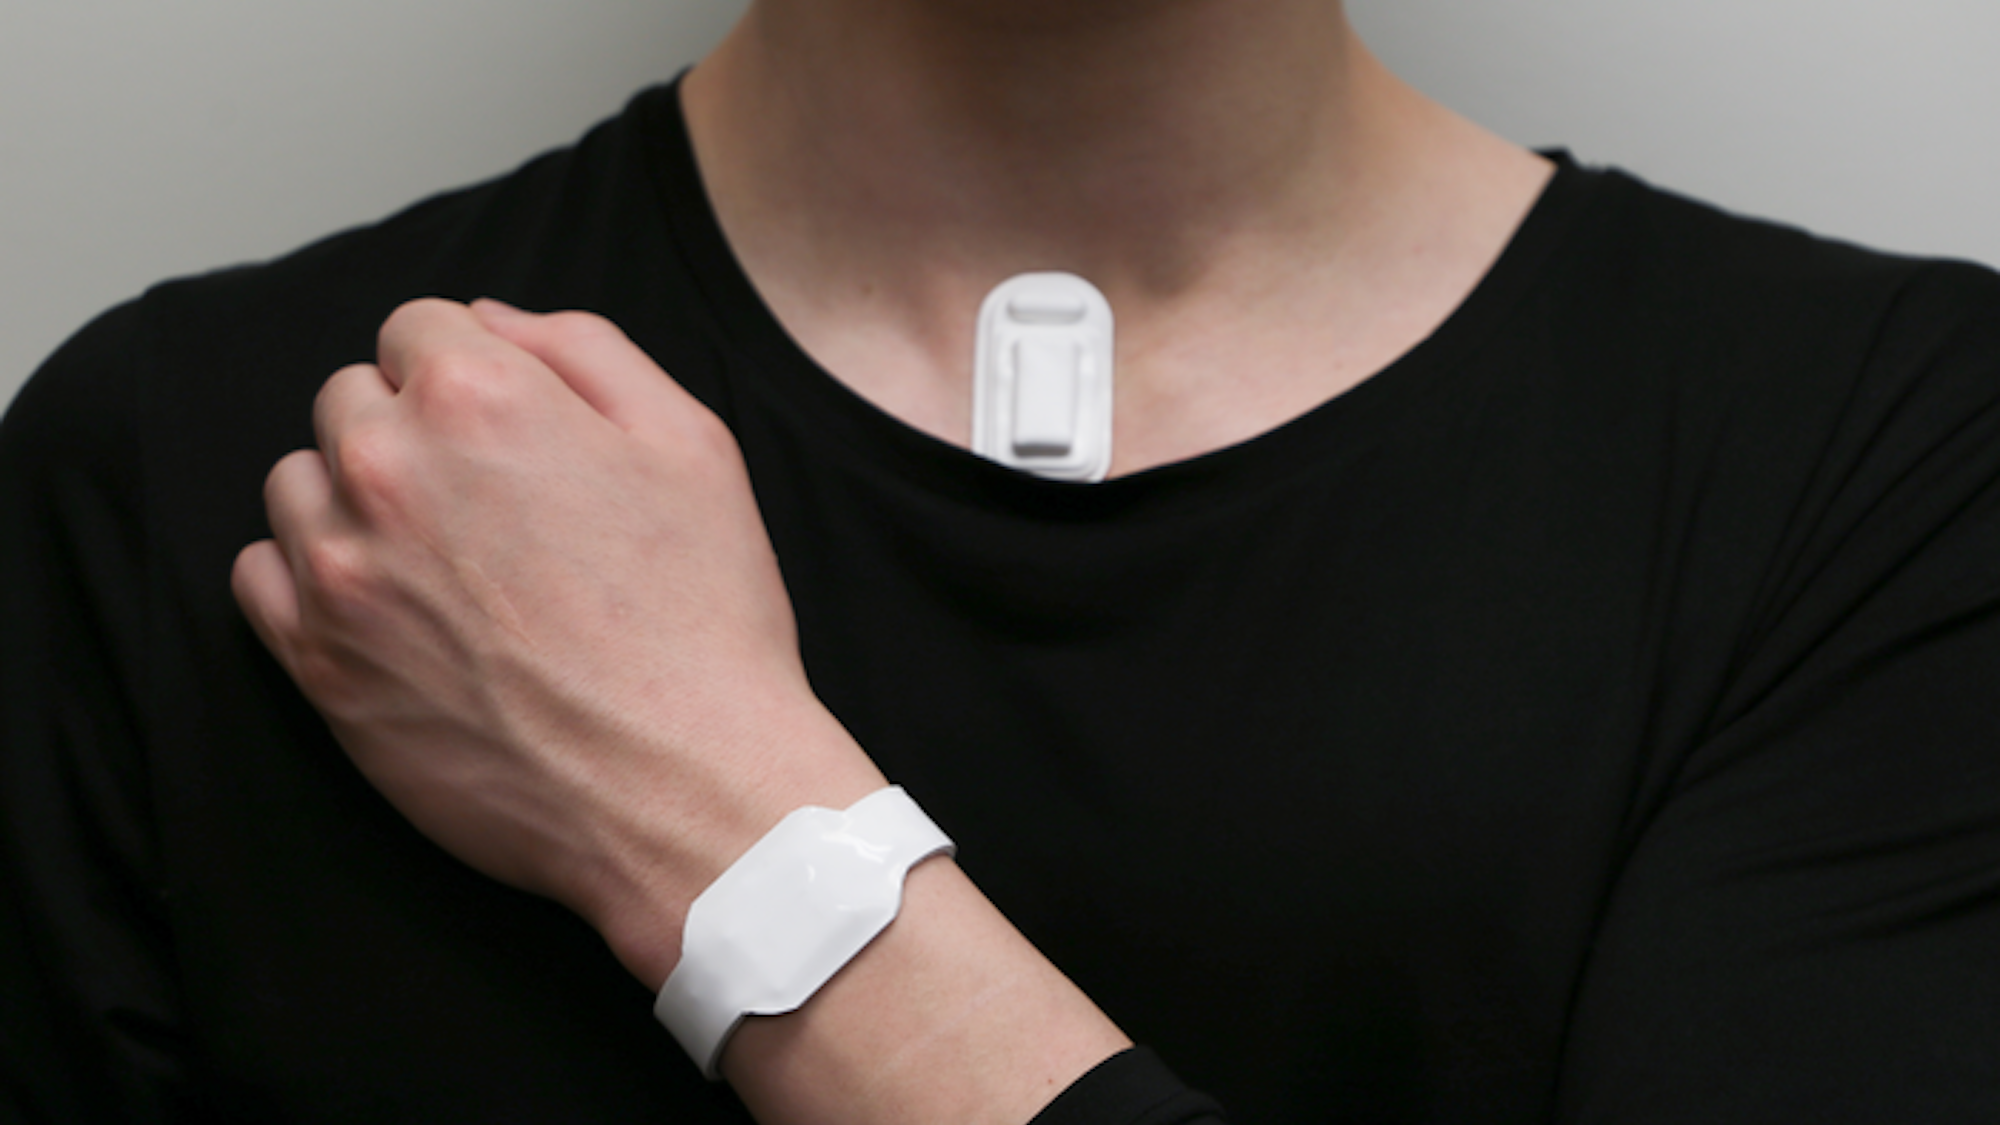 Close up of person wearing vocal strain monitor and haptic wrist device